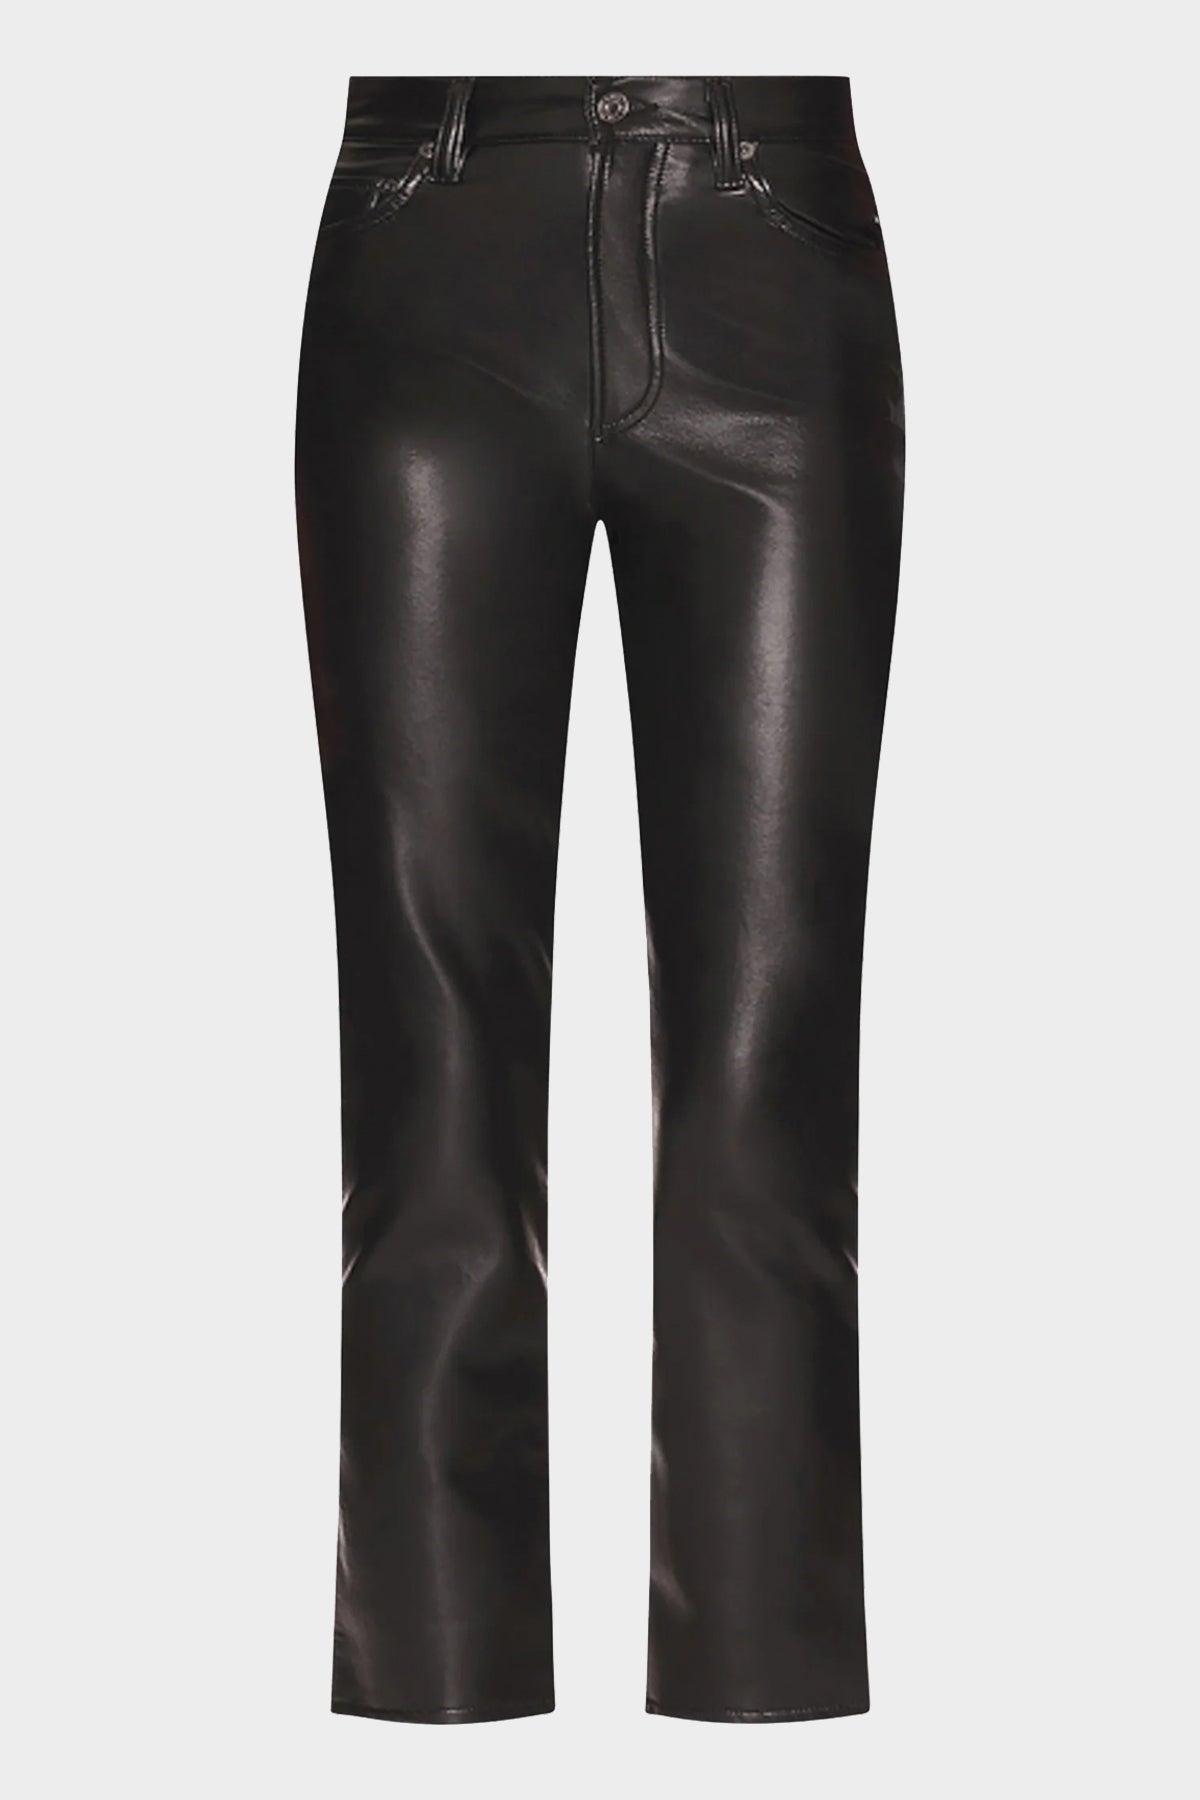 Recycled Leather Riley Long Jean in Detox - shop-olivia.com